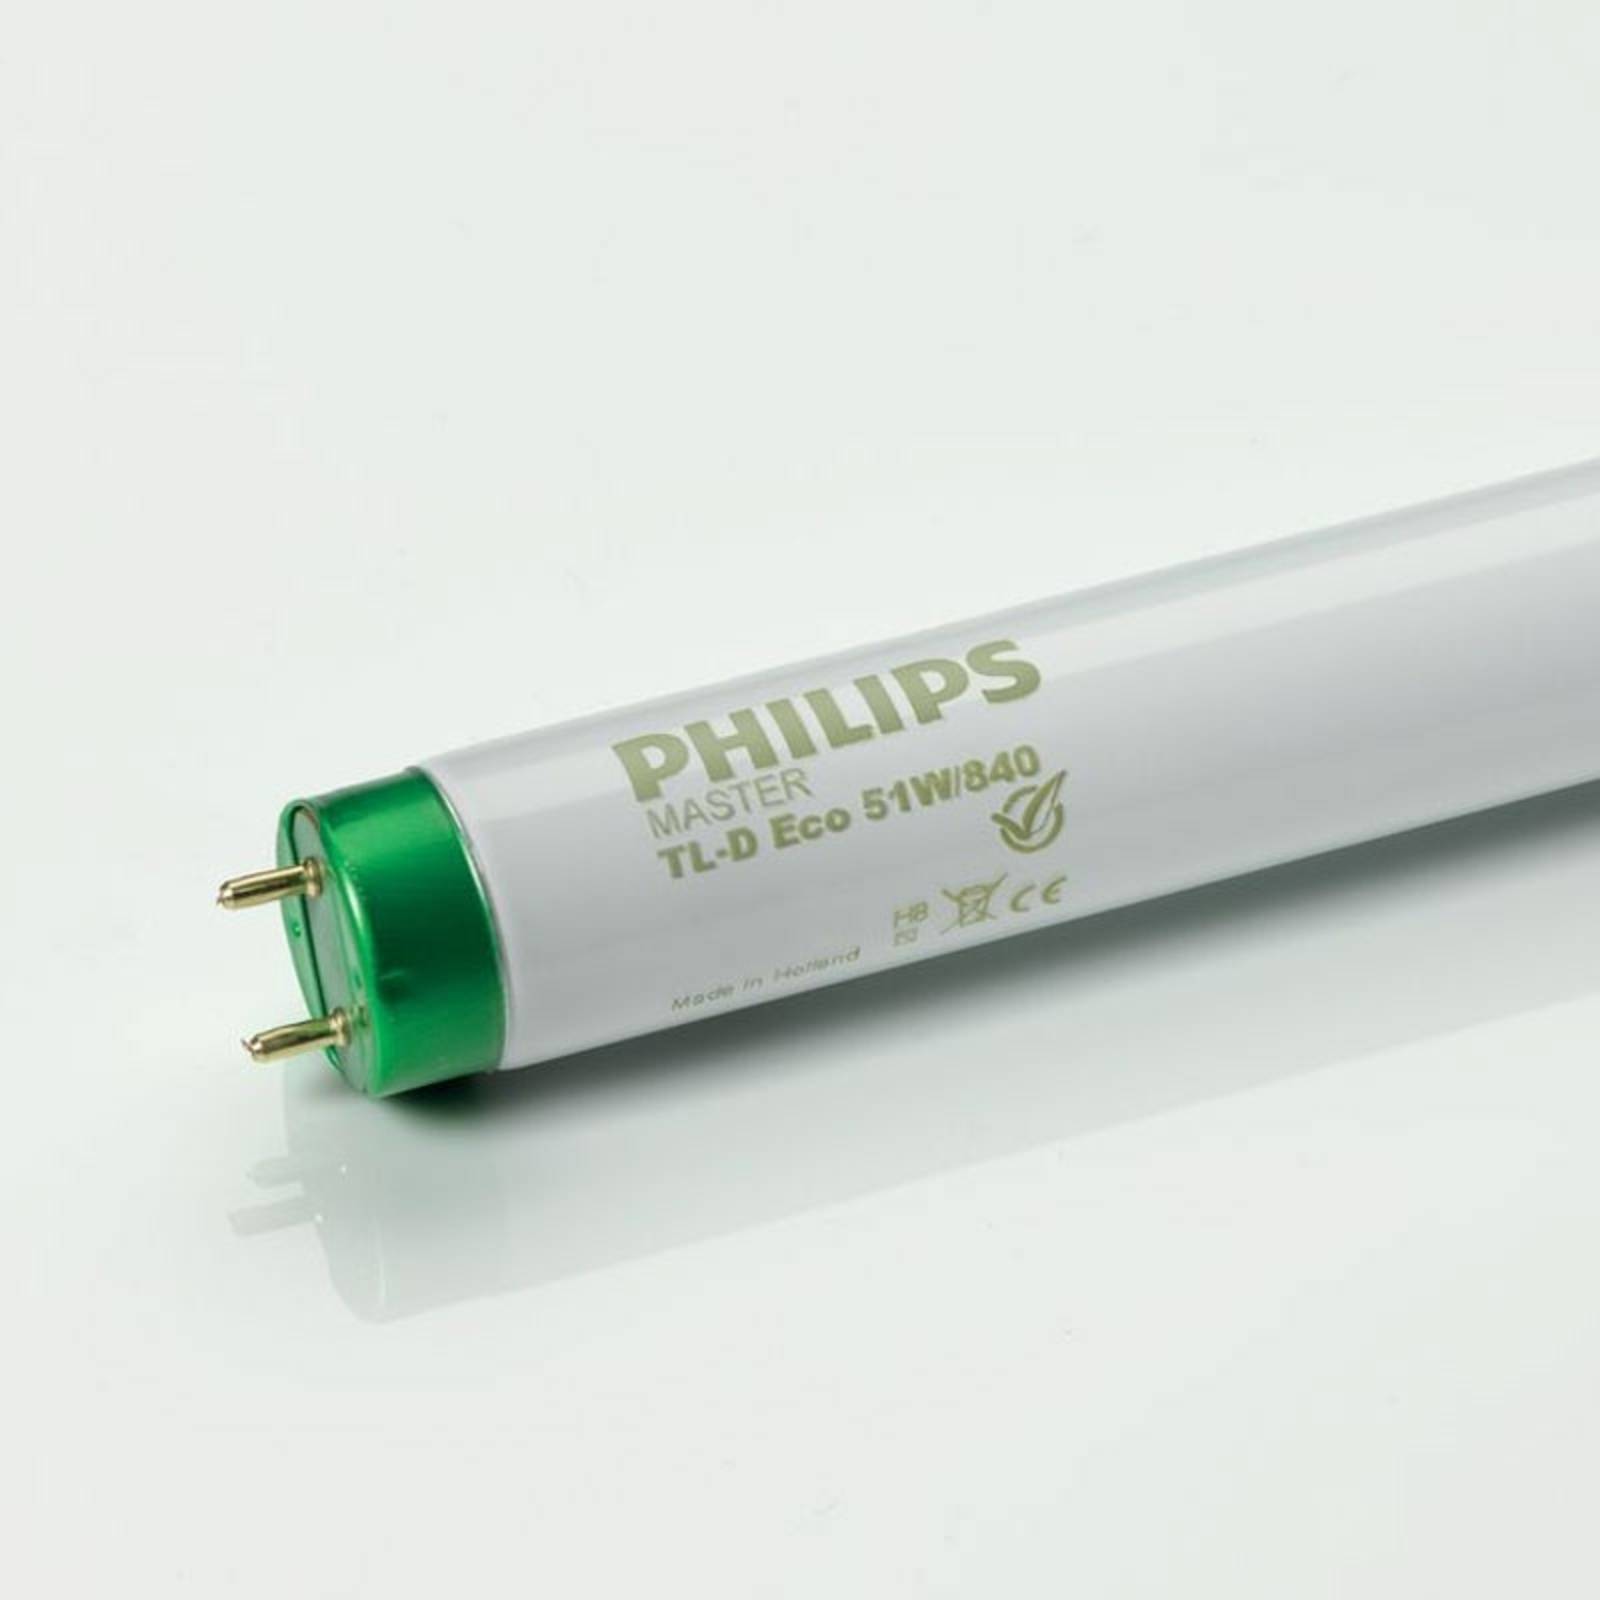 Philips Leuchtstoffröhre G13 T8 Master TL-D Eco 830 32W